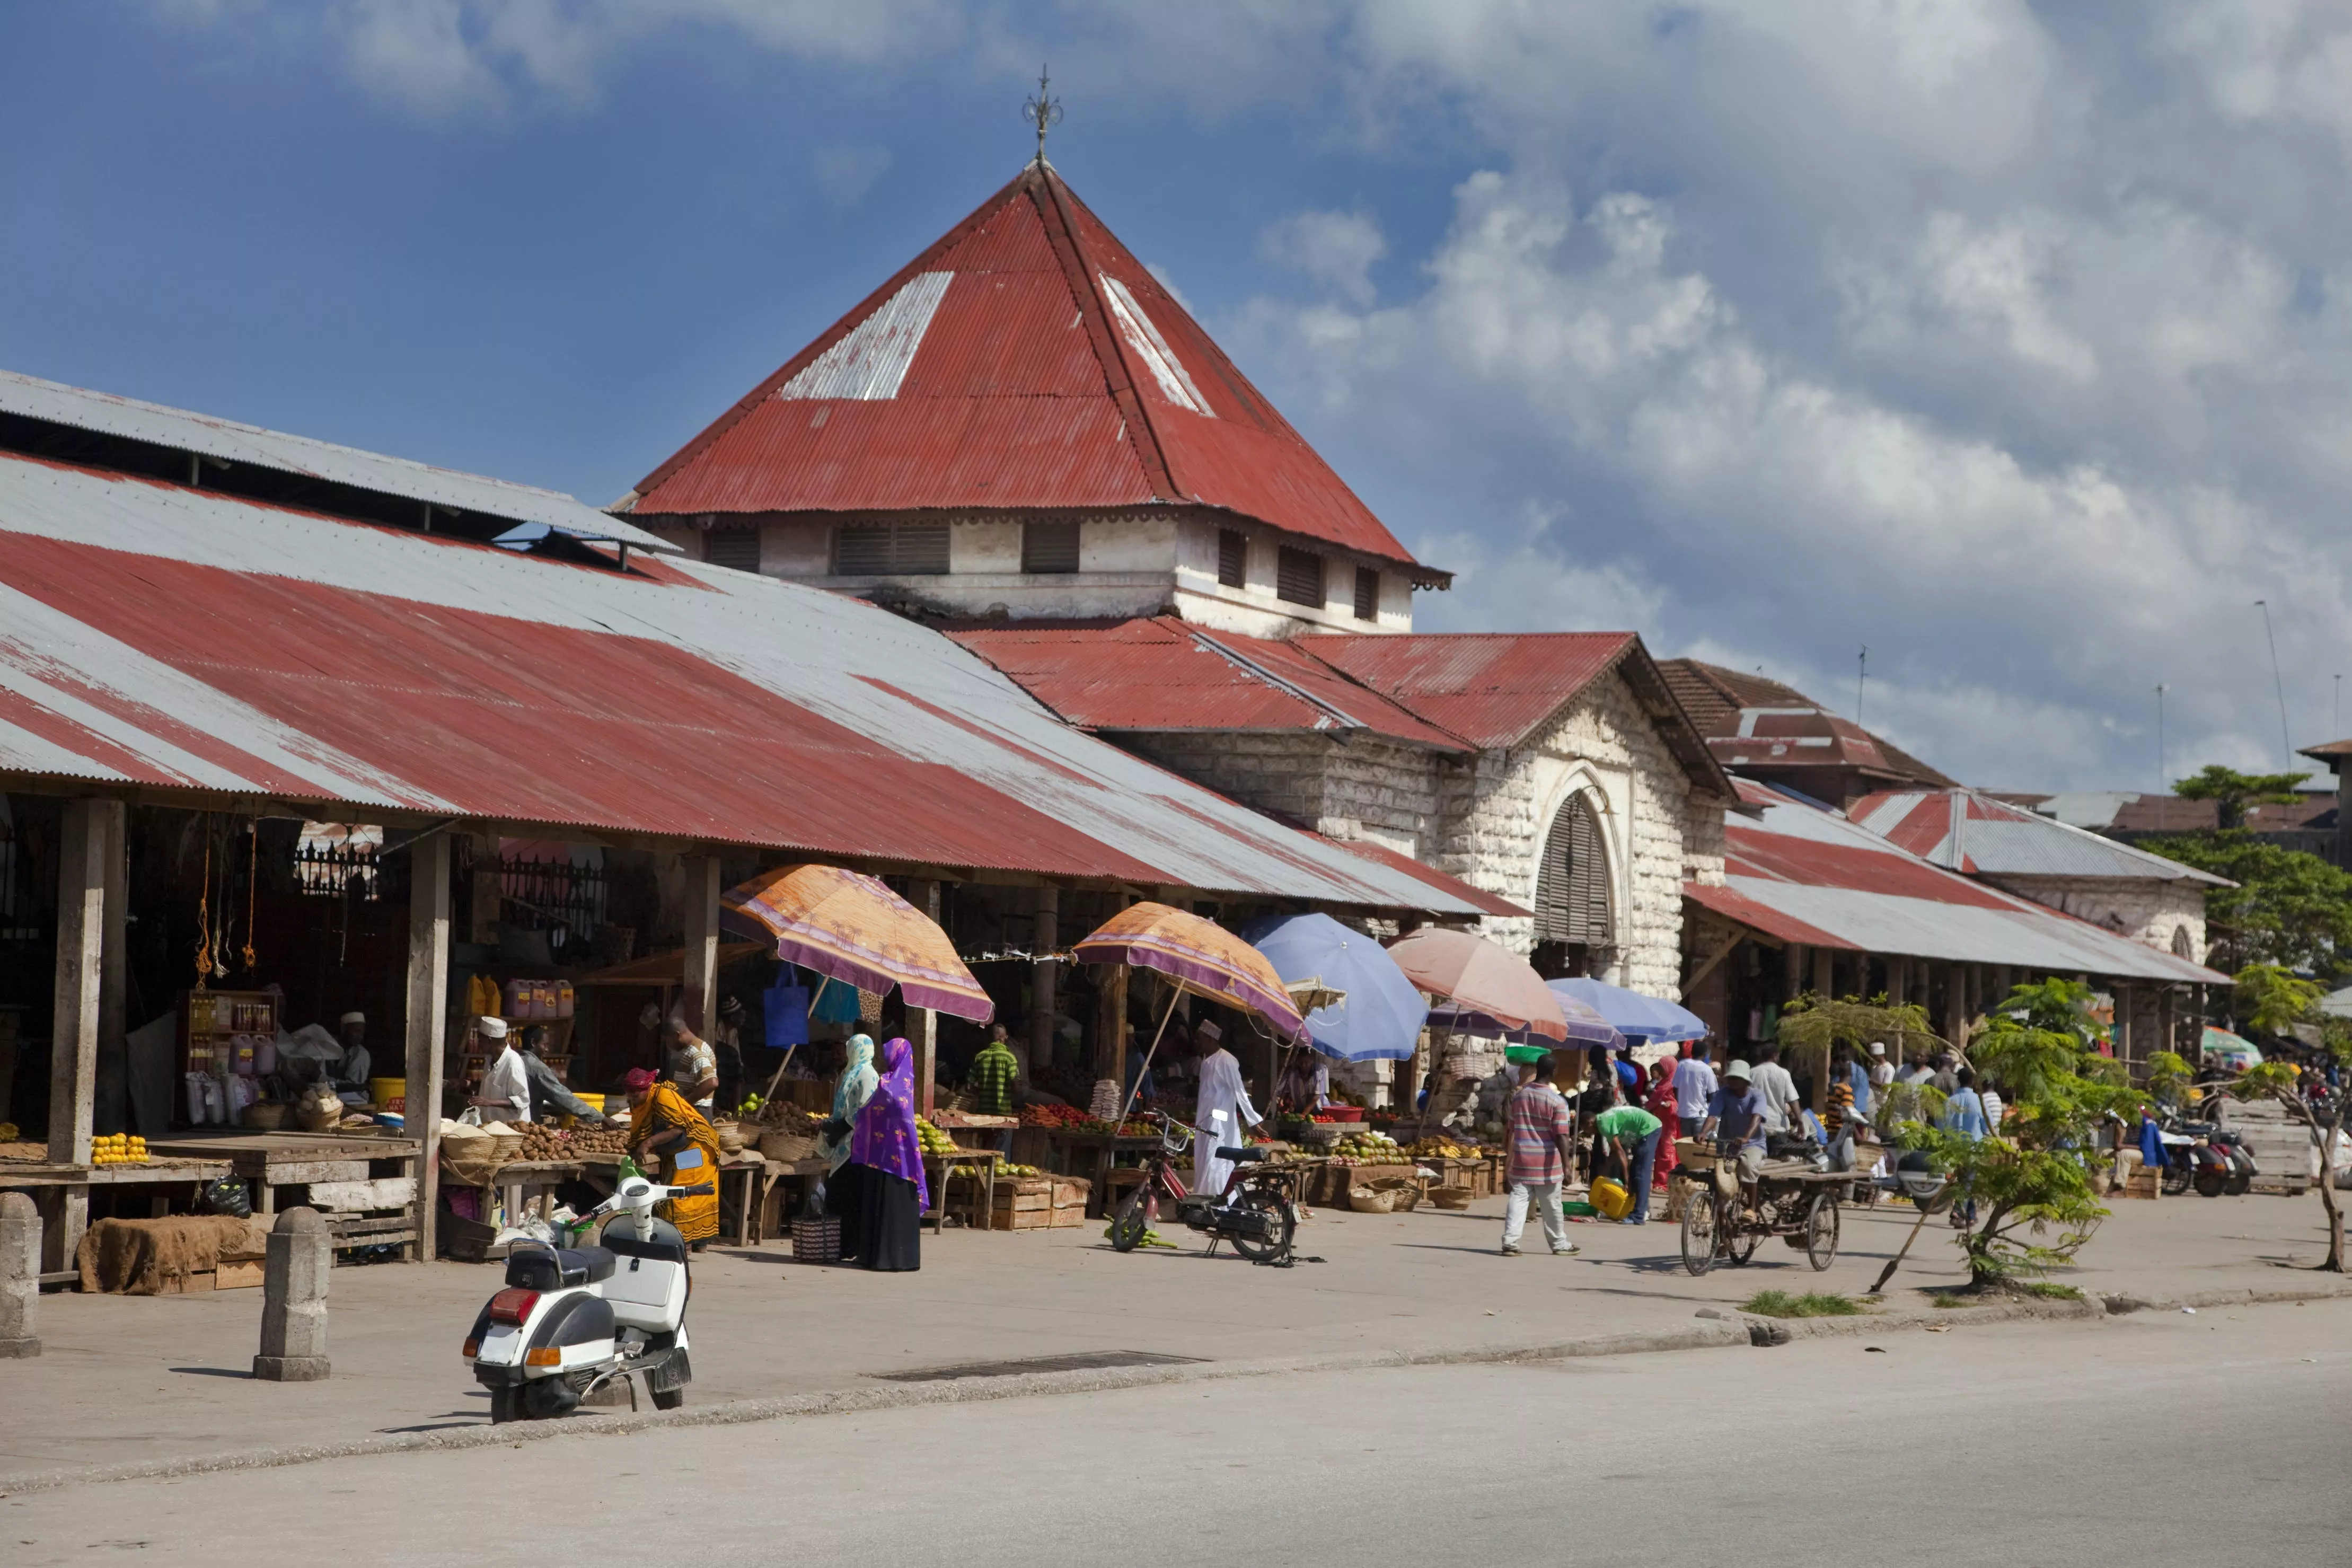 Darajani Market in Tanzania, Africa | Architecture,Street Food - Rated 3.4